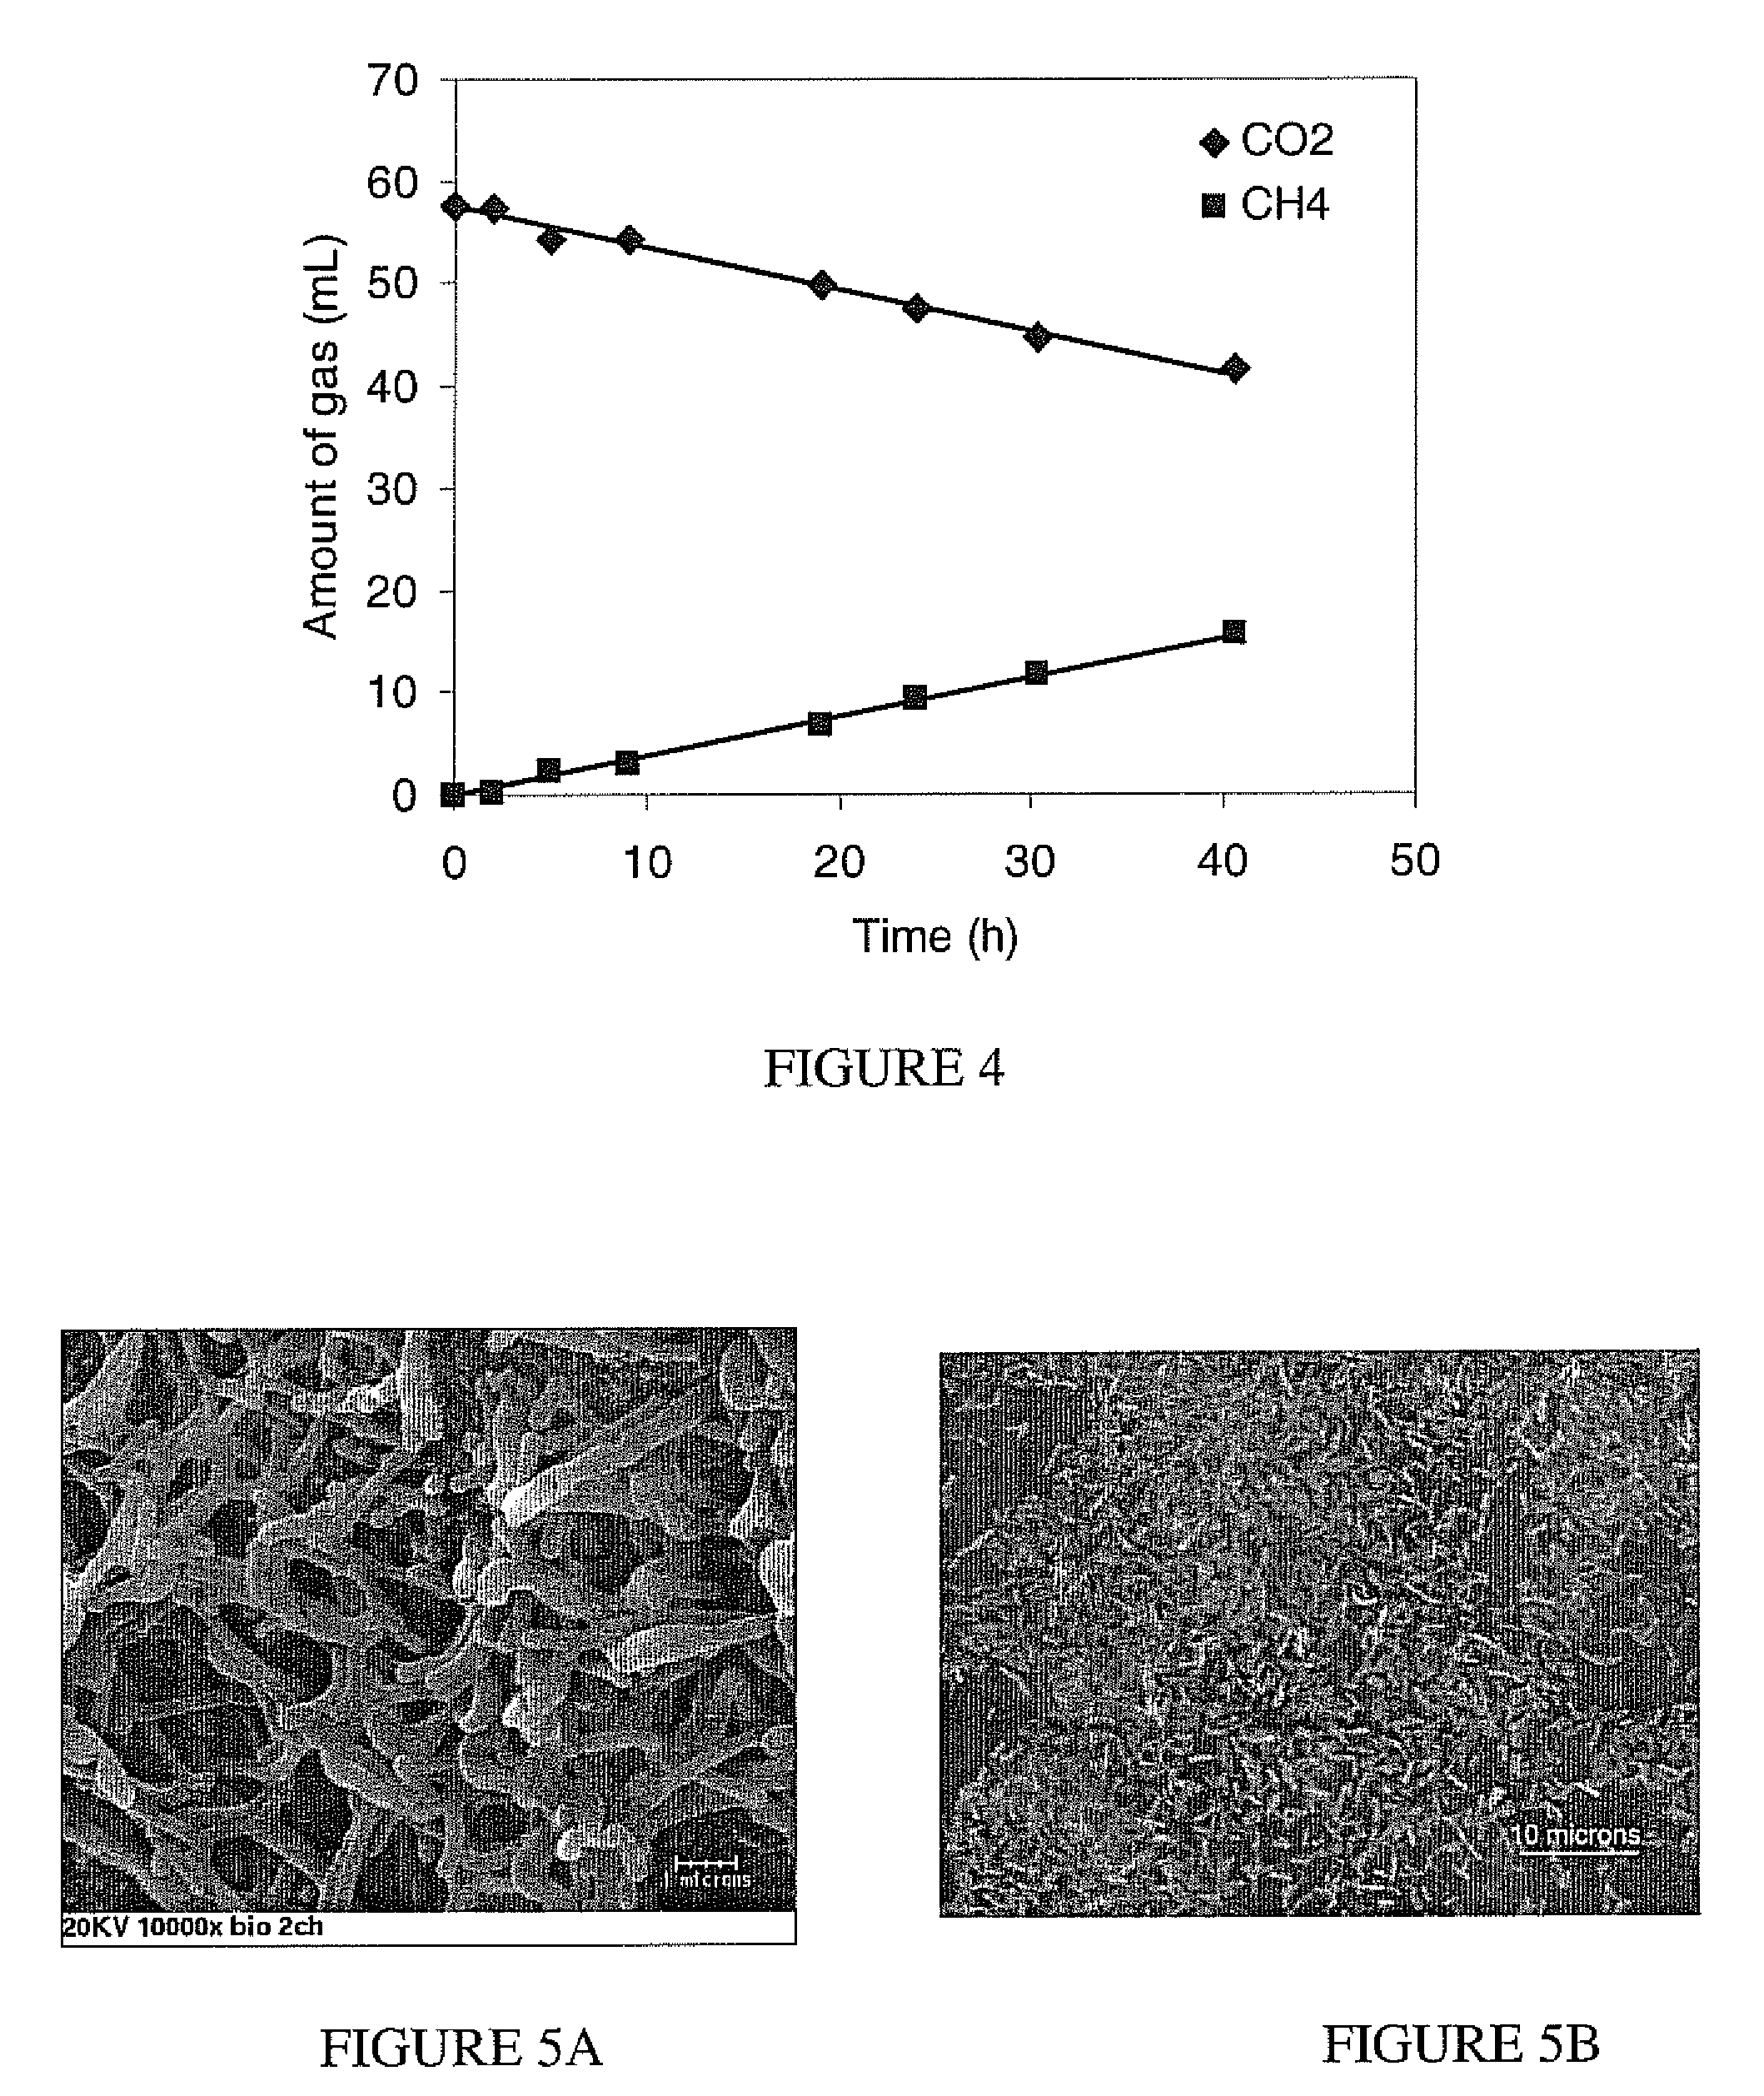 Electromethanogenic reactor and processes for methane production